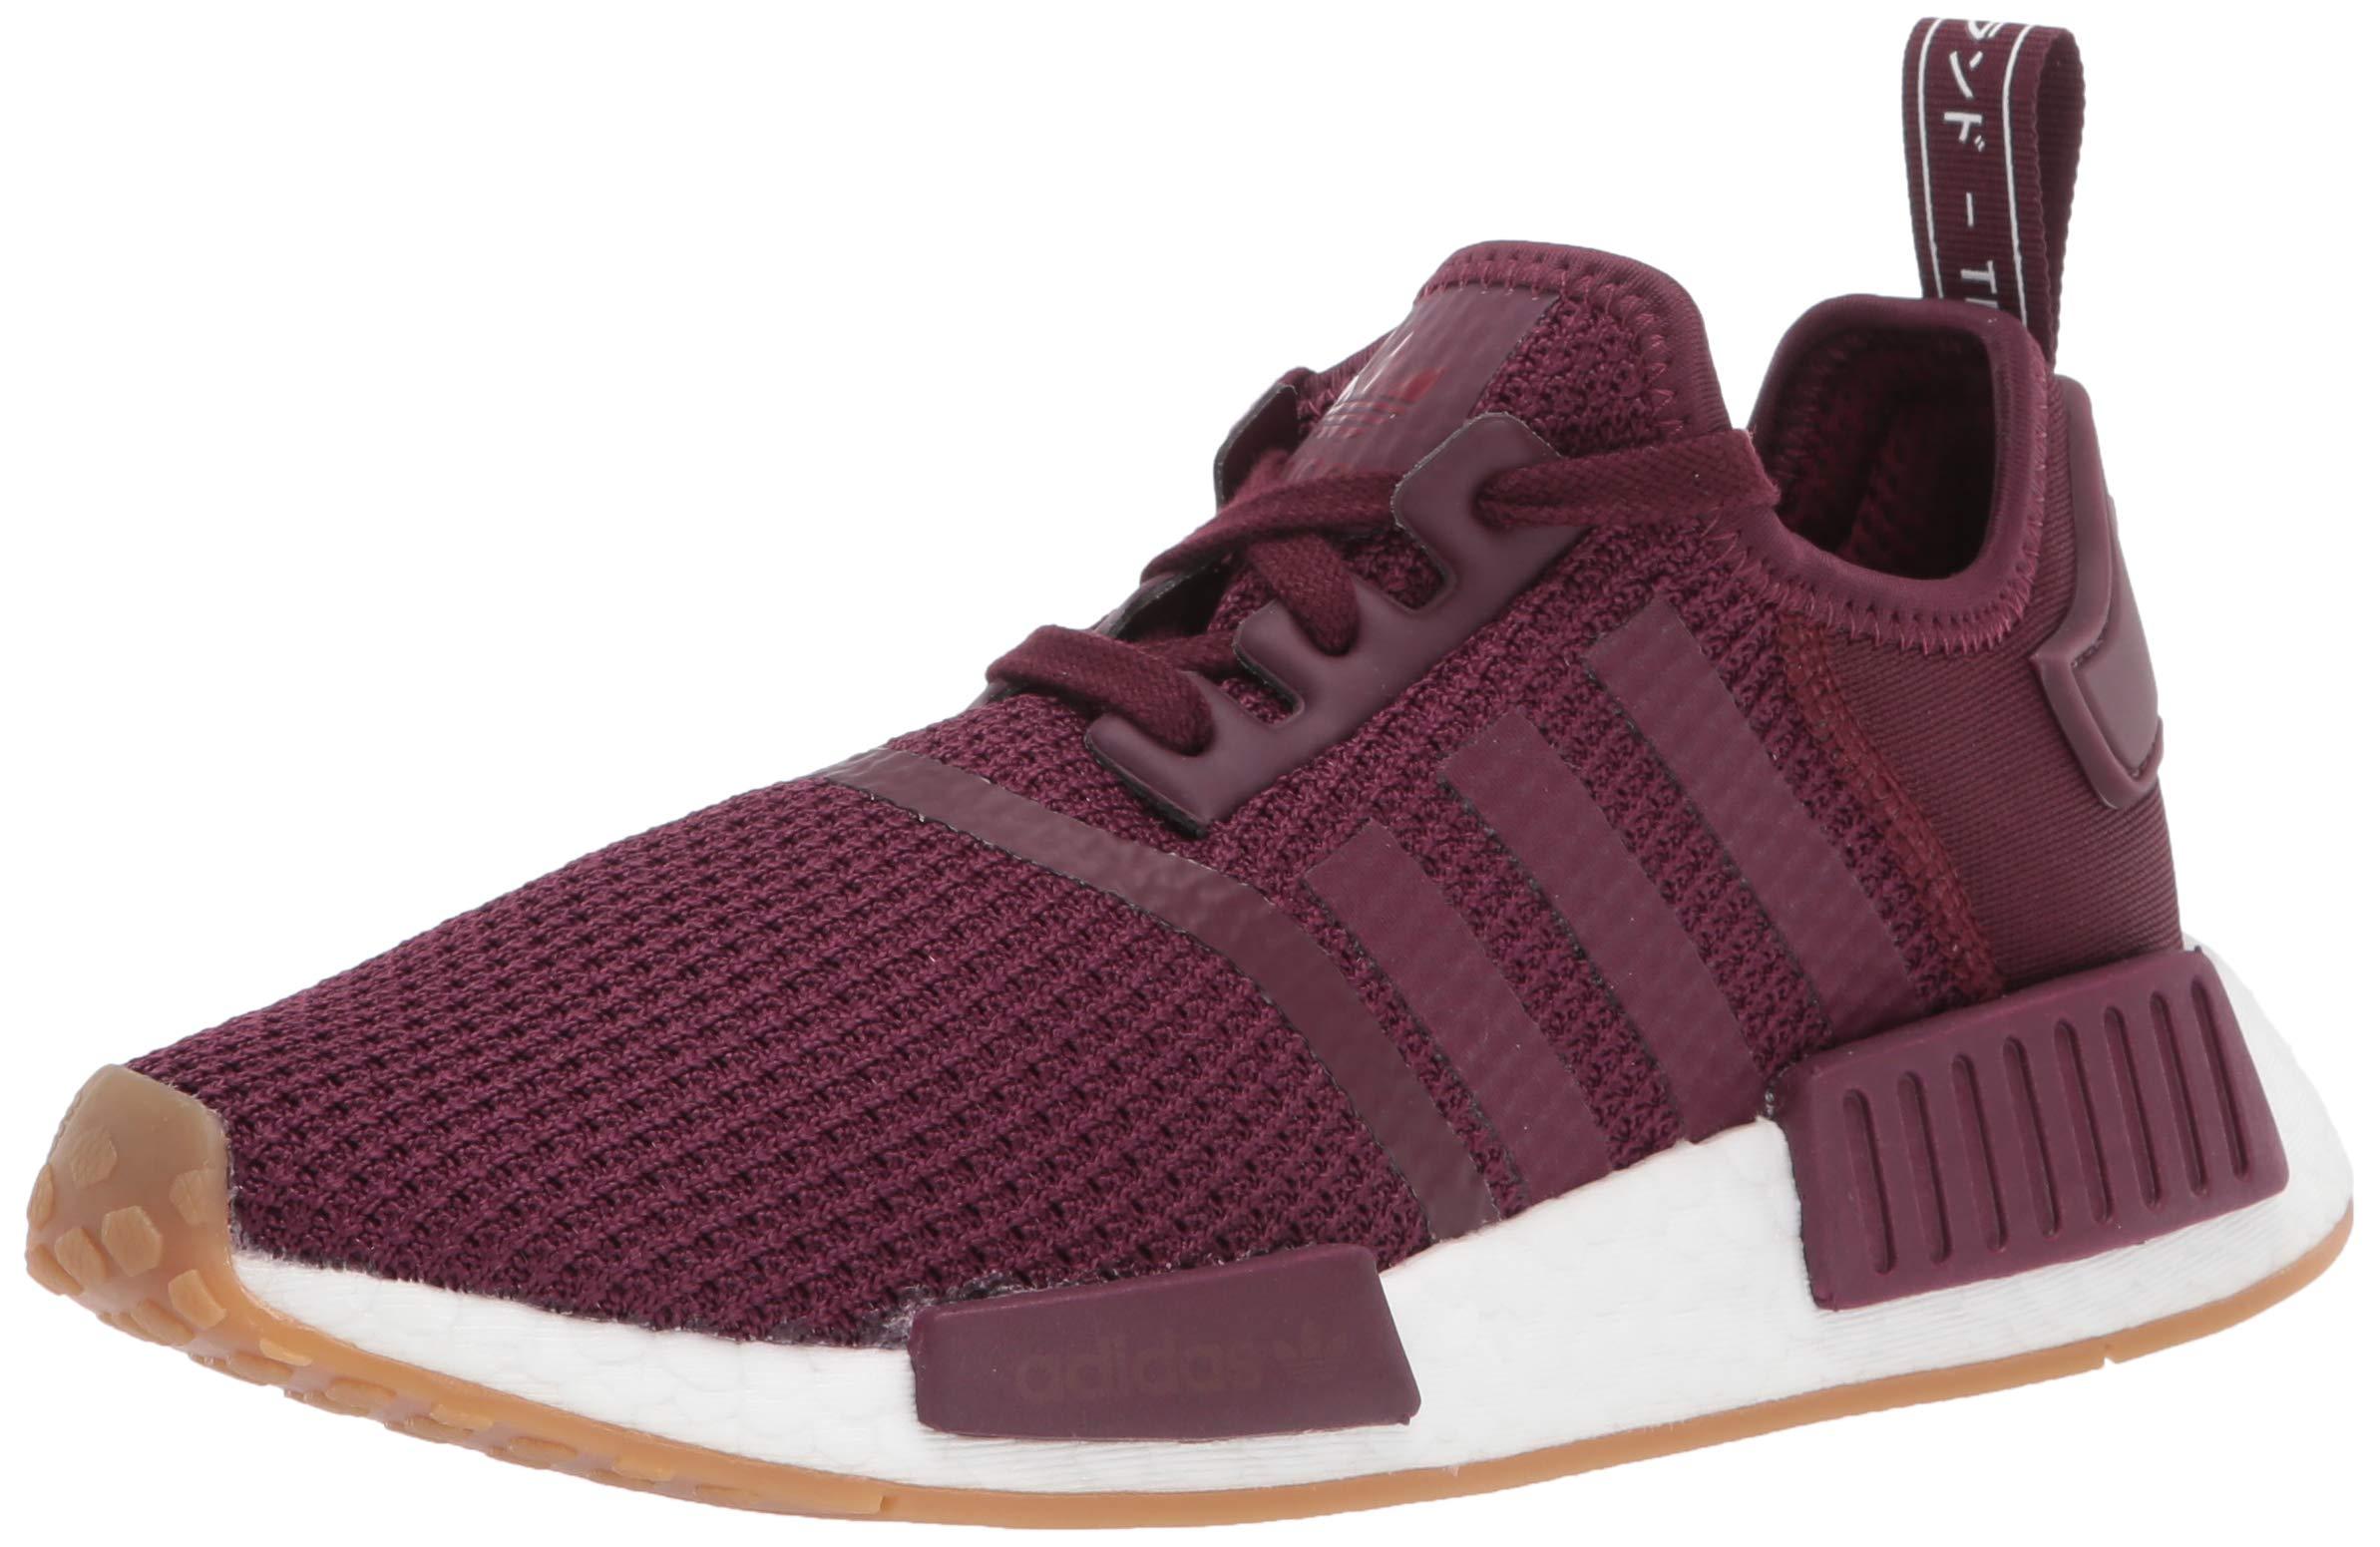 adidas Originals Lace Nmd_r1 Shoe in Purple for Men - Lyst